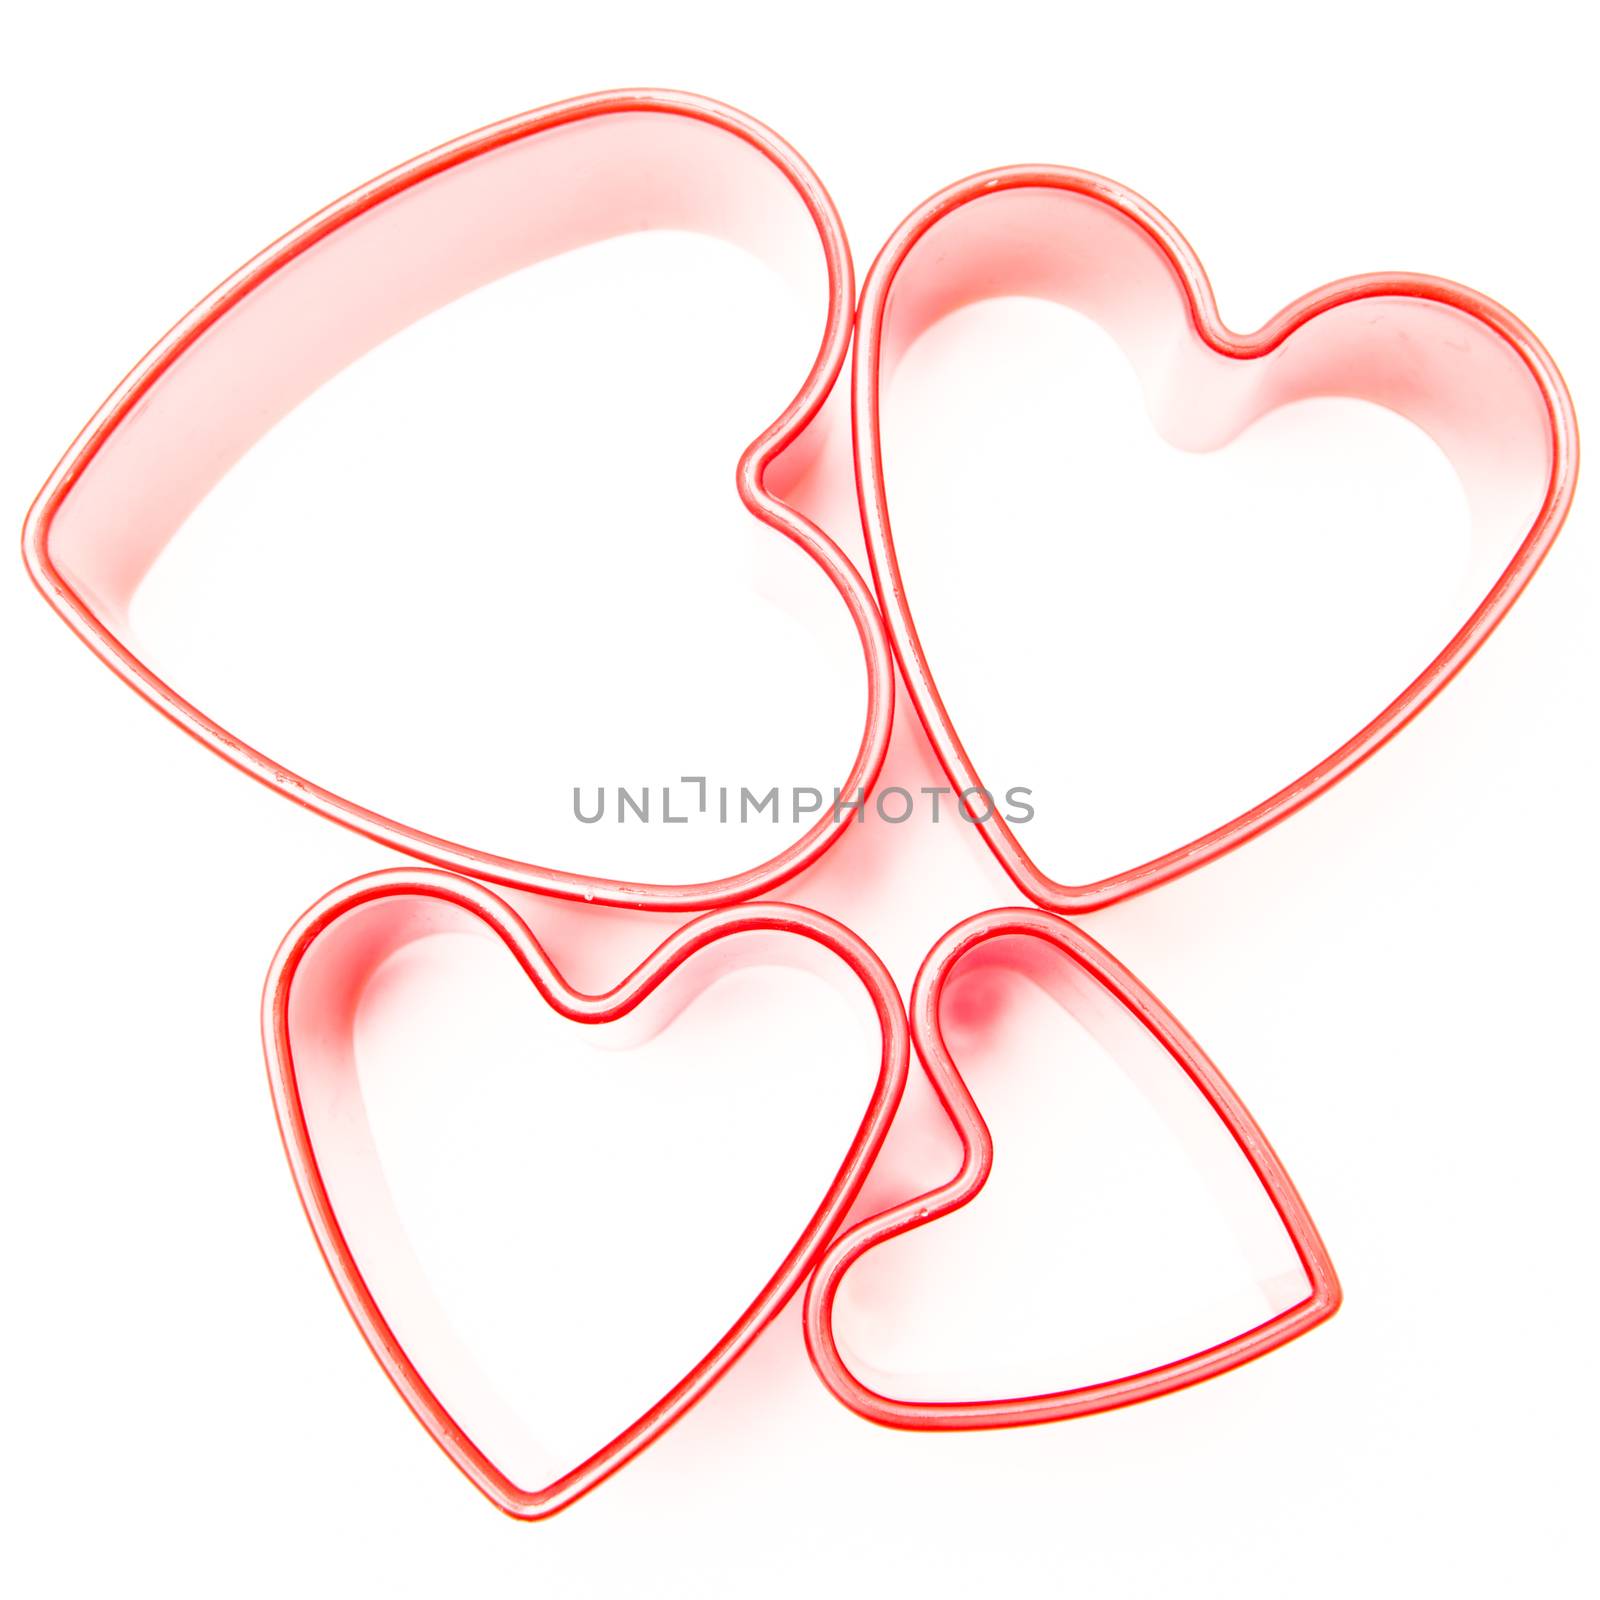 Four pink heart cookie cutters on white background